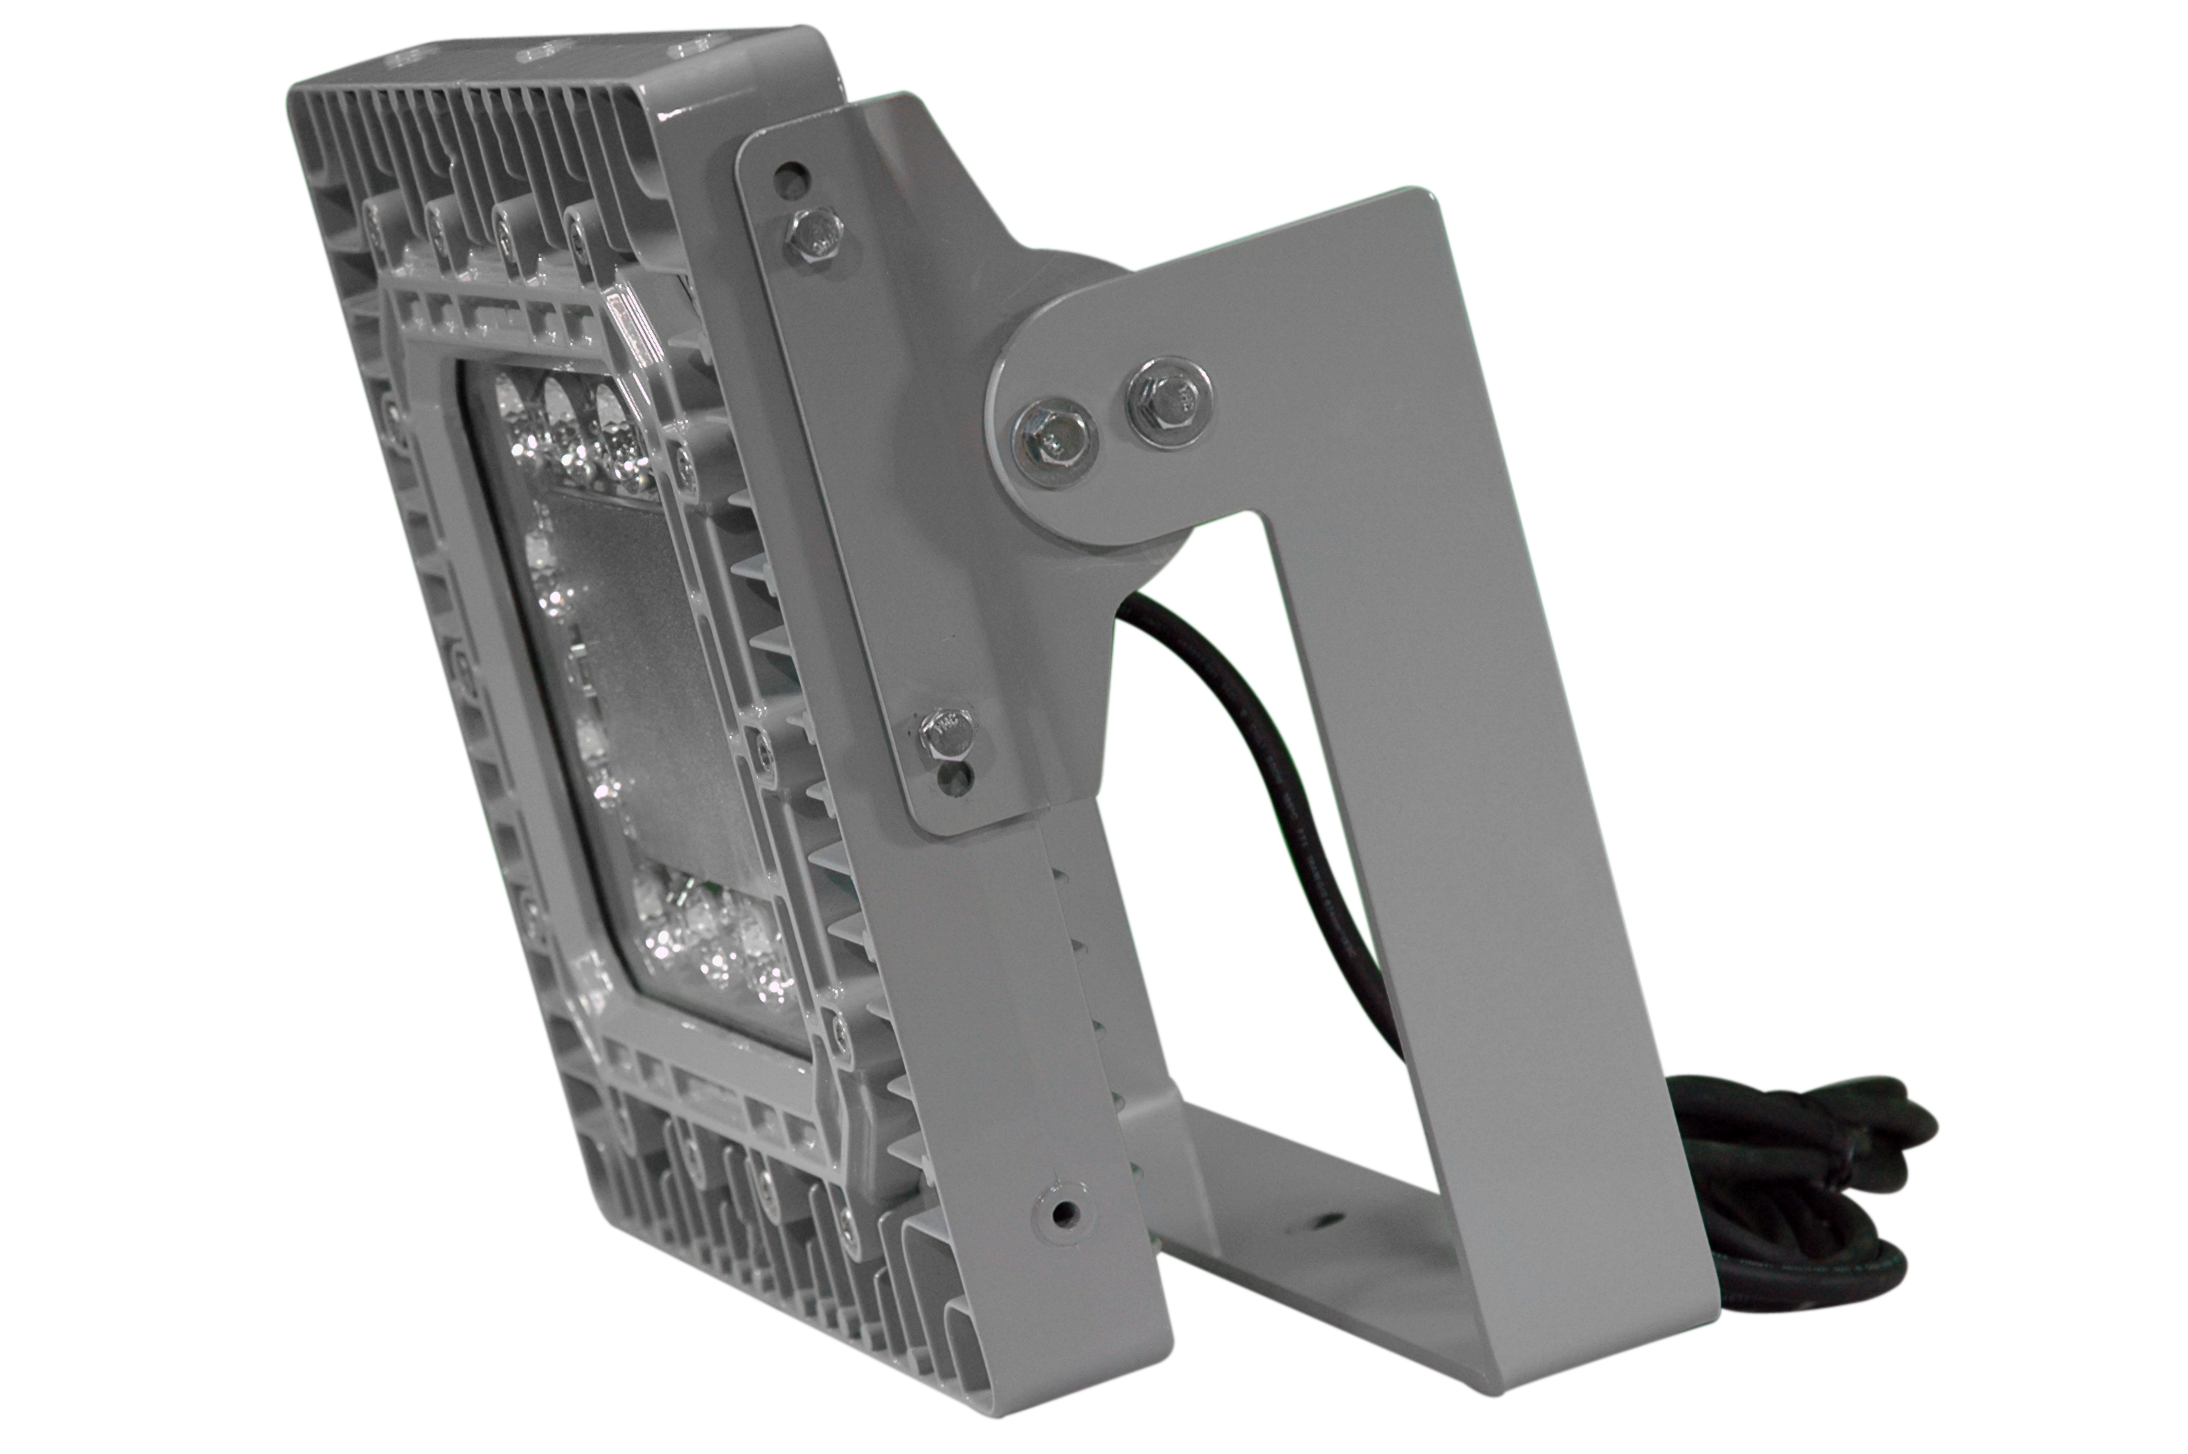 150 Watt Marine and Outdoor Rated LED Flood Light with Surface Mount Trunnion